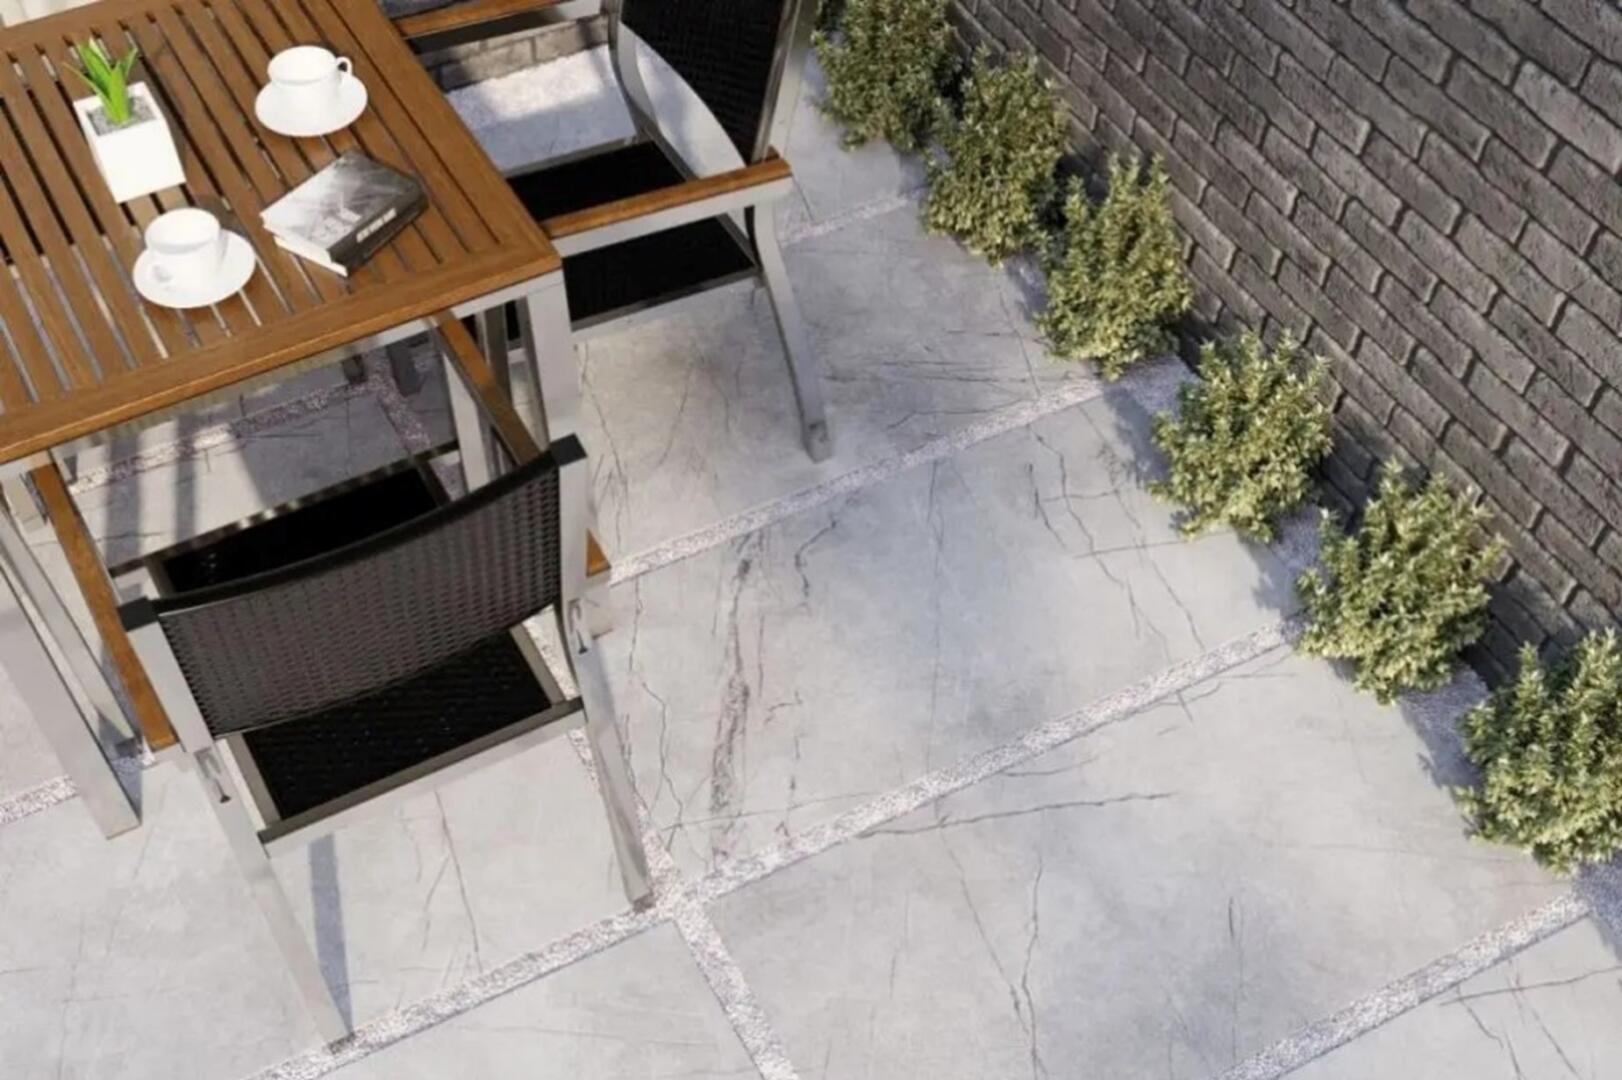 Outdoor marble tiles in a patio